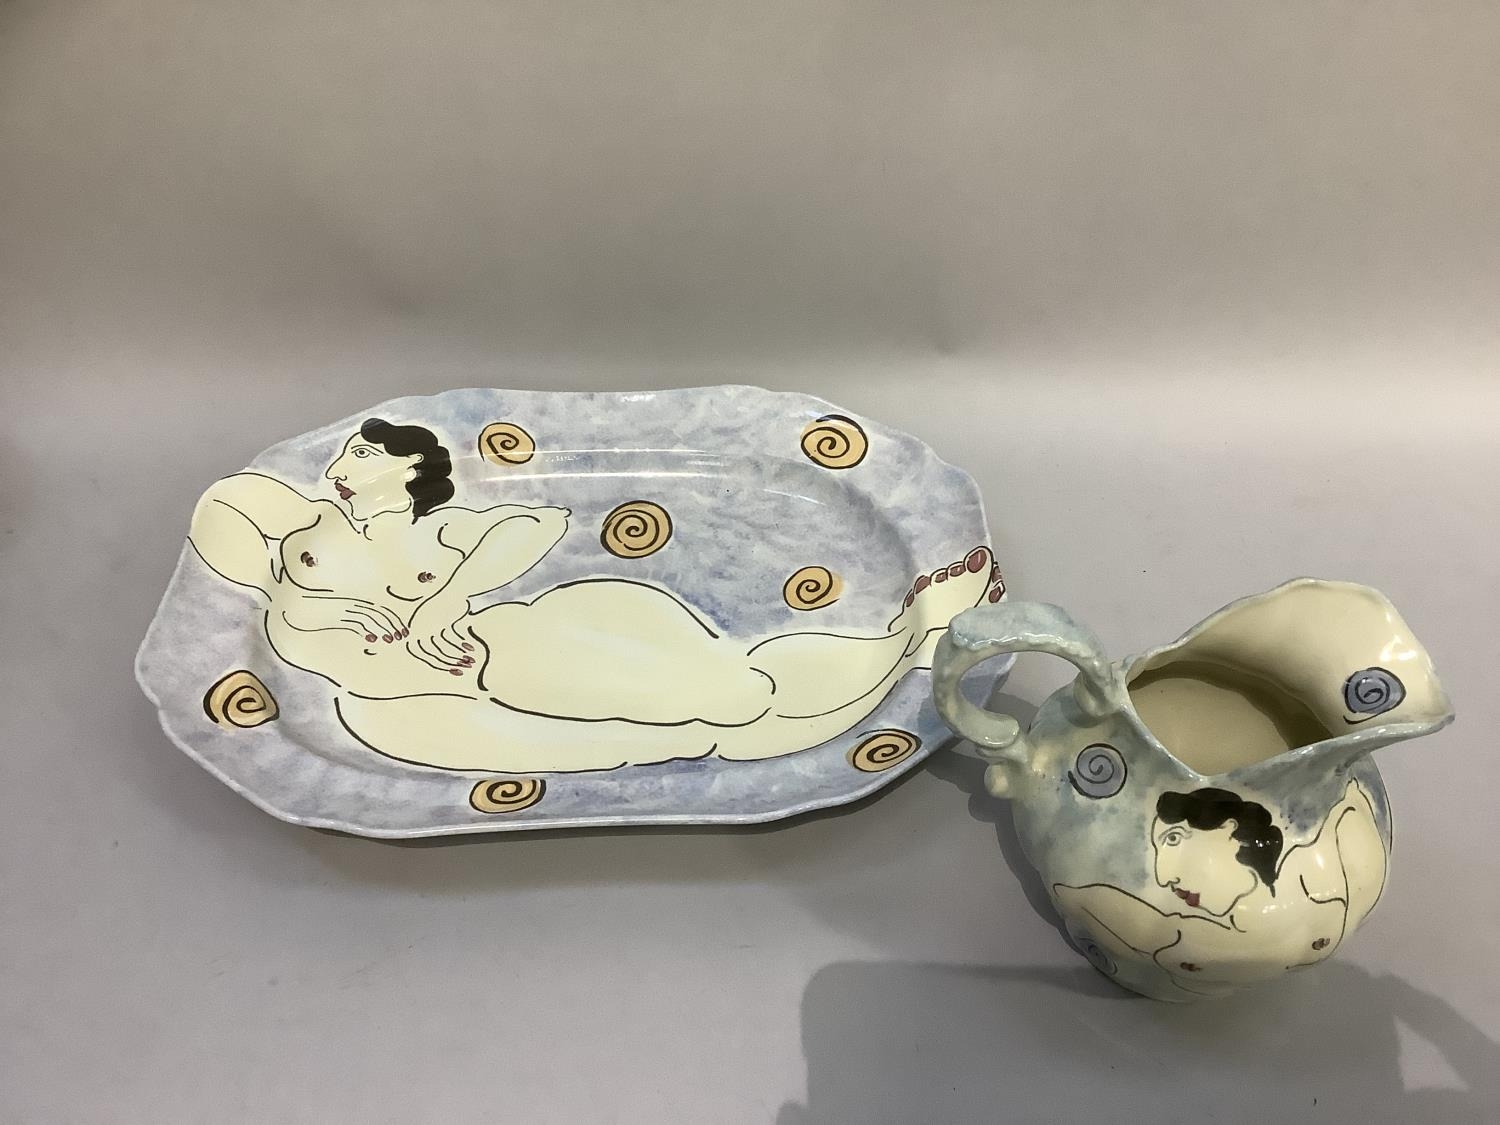 A Heron Cross pottery meat dish and jug decorated in the style of Picasso with a female nude - Image 2 of 2